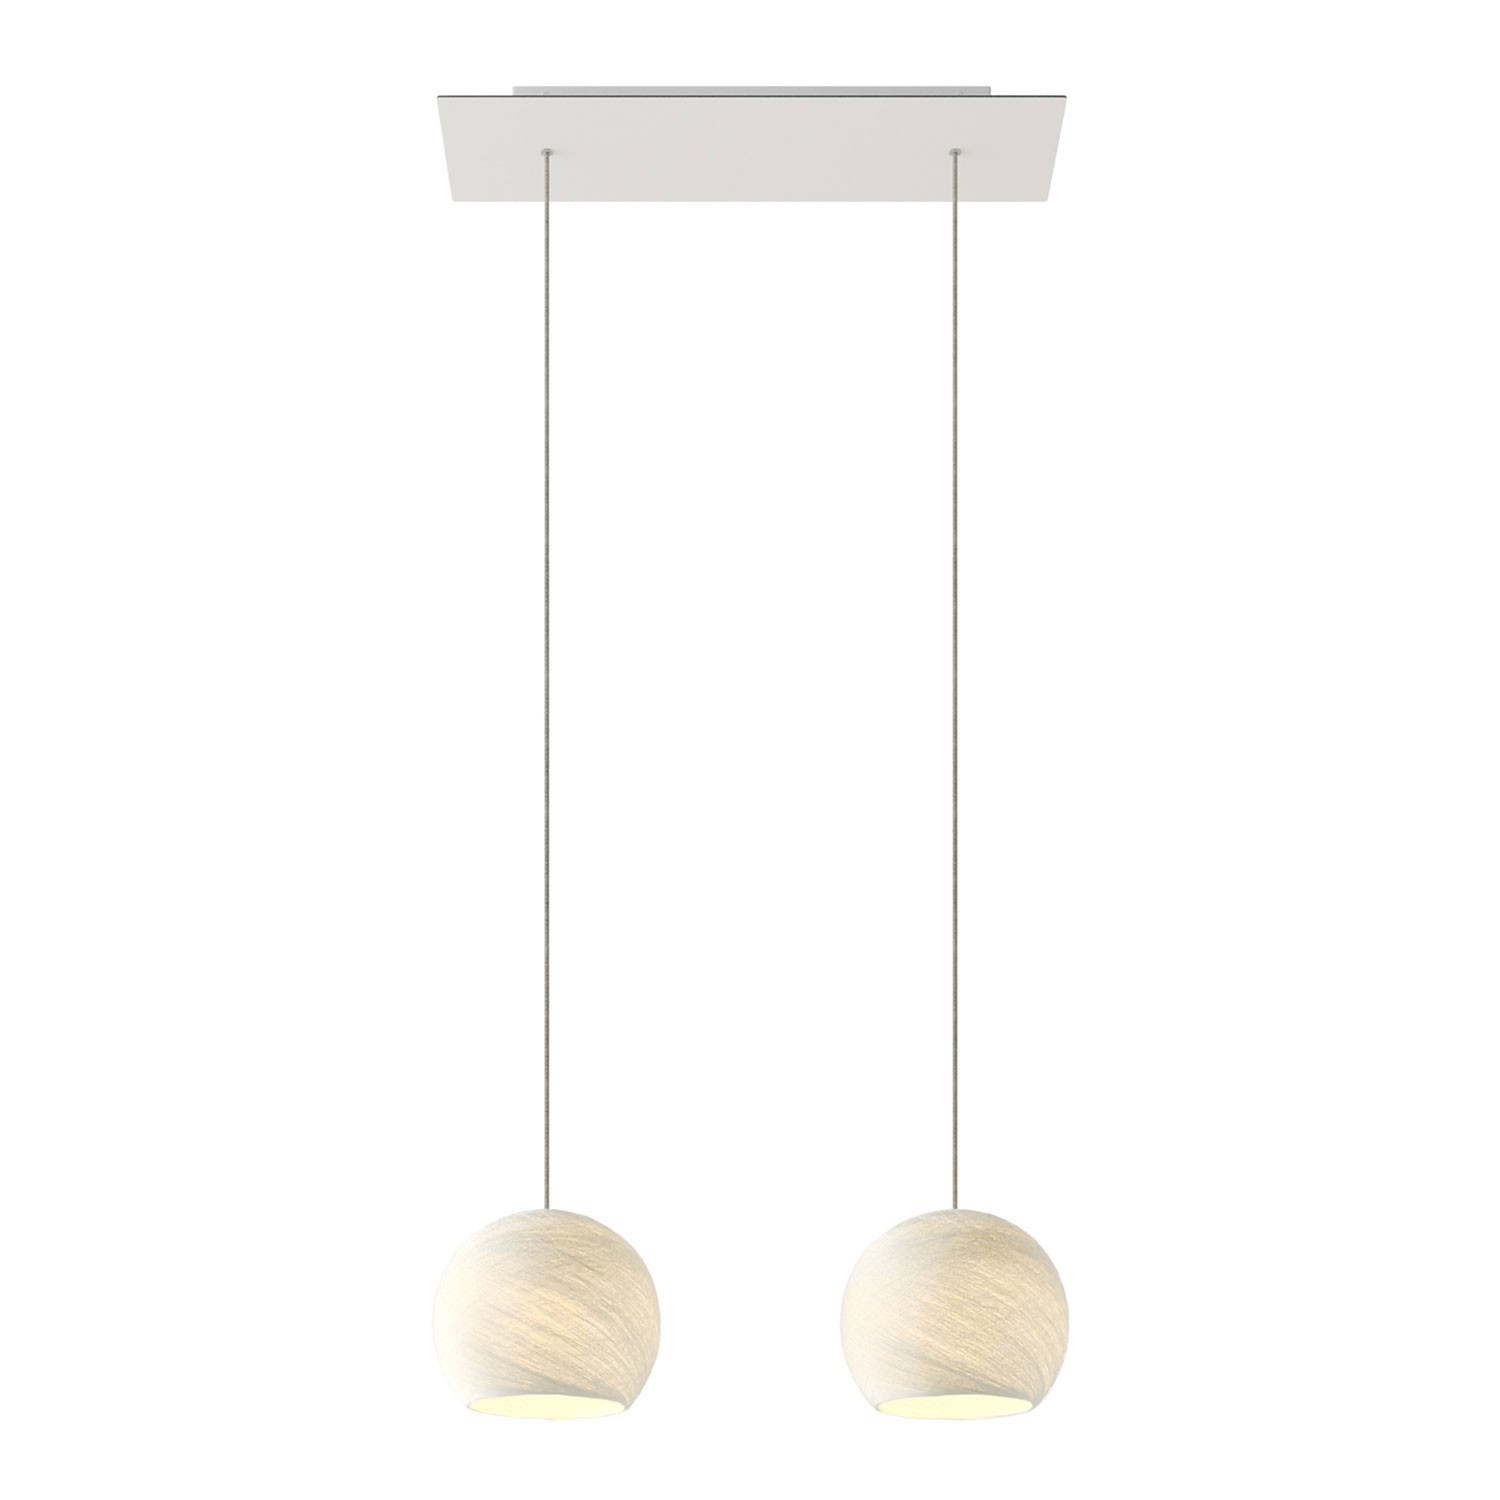 2-light pendant lamp with 675 mm rectangular XXL Rose-One, featuring fabric cable and Dome XS lampshade